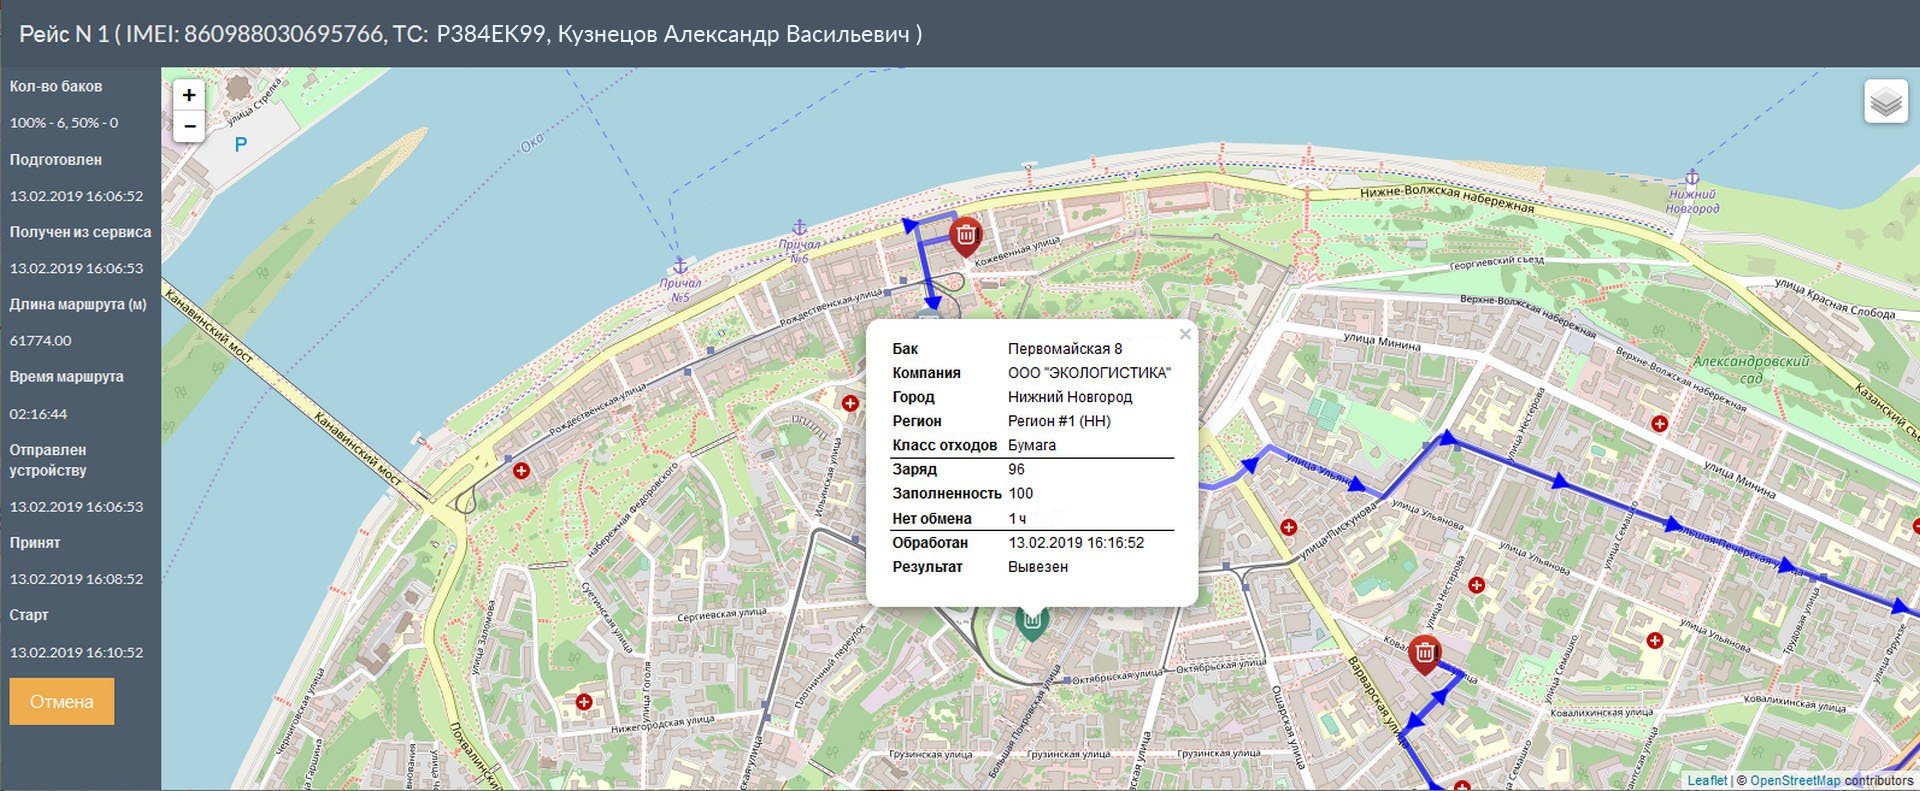 Operator application. Map and information window